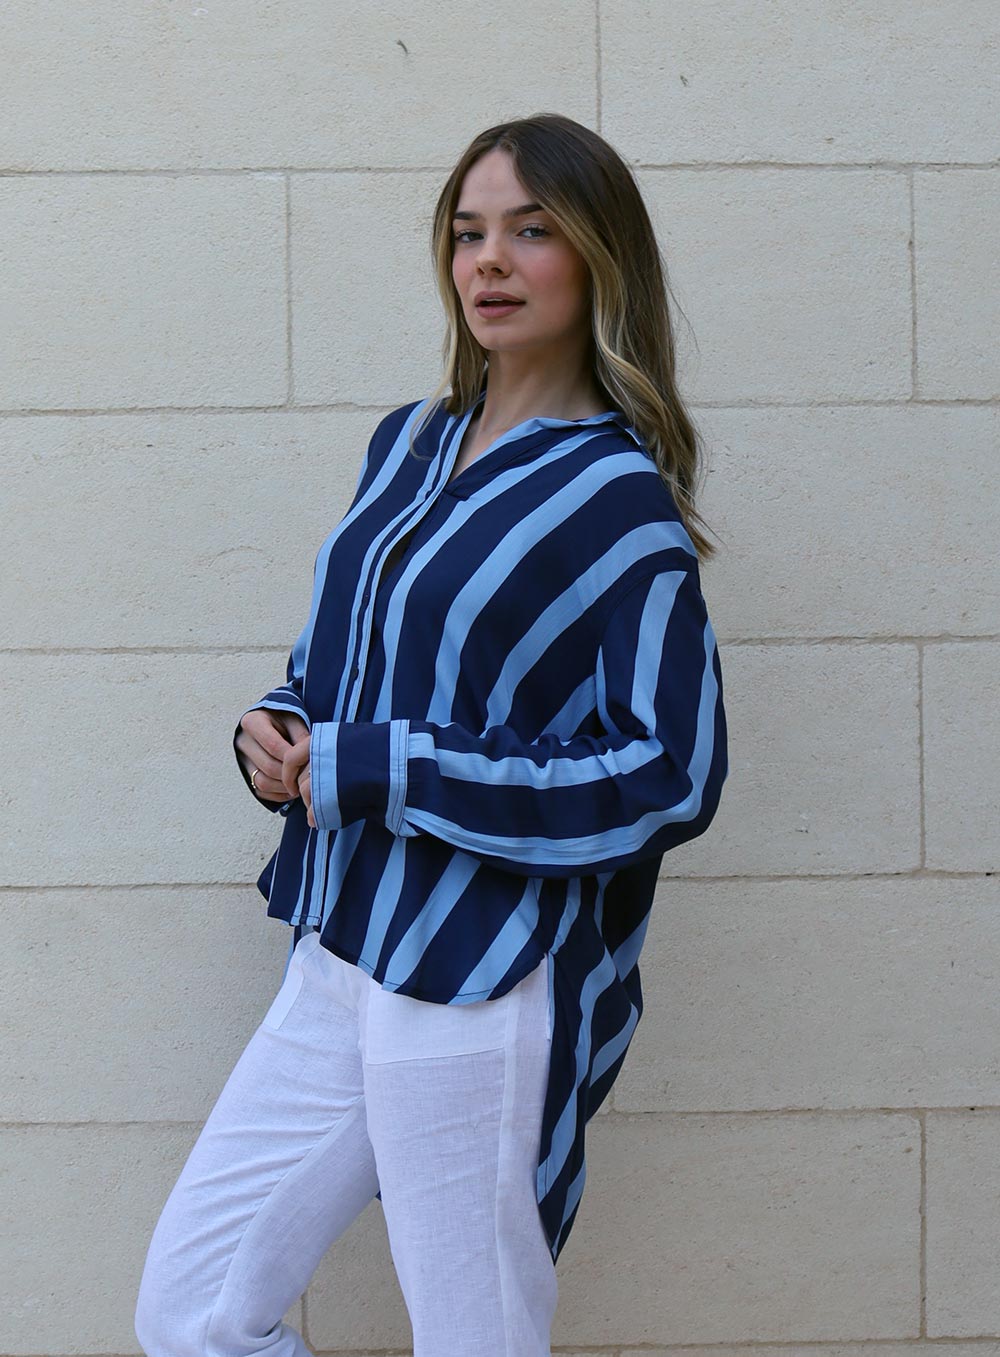 Apre stripe shirt features, super draping rayon fabric, 2 tone thick stripe pattern in navy and light blue, button through front, button down cuff, curved hem with longer tail. 